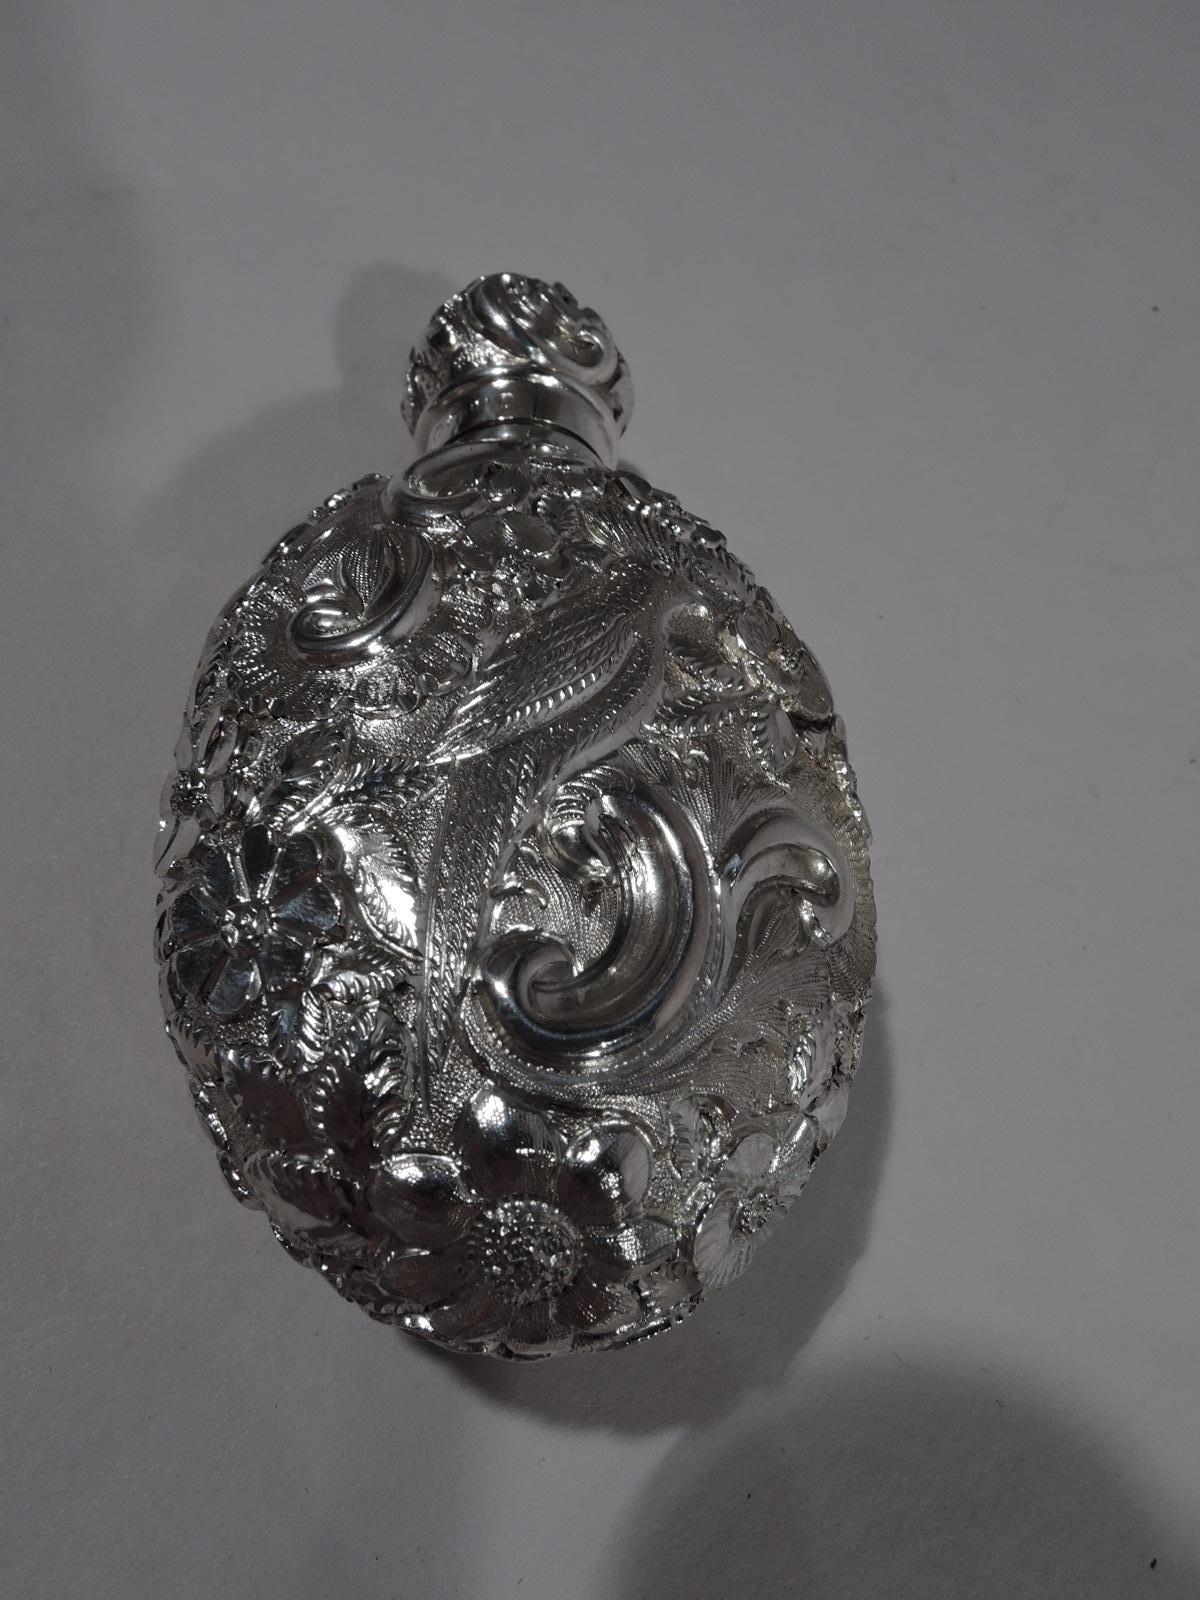 Victorian sterling silver scent bottle, 1889. Ovoid with short neck and threaded ball cover. Allover repousse with flowers and scrolls. A peacock on one side, a dove on the other. Pretty and portable. Worn marks including London assay stamp.  